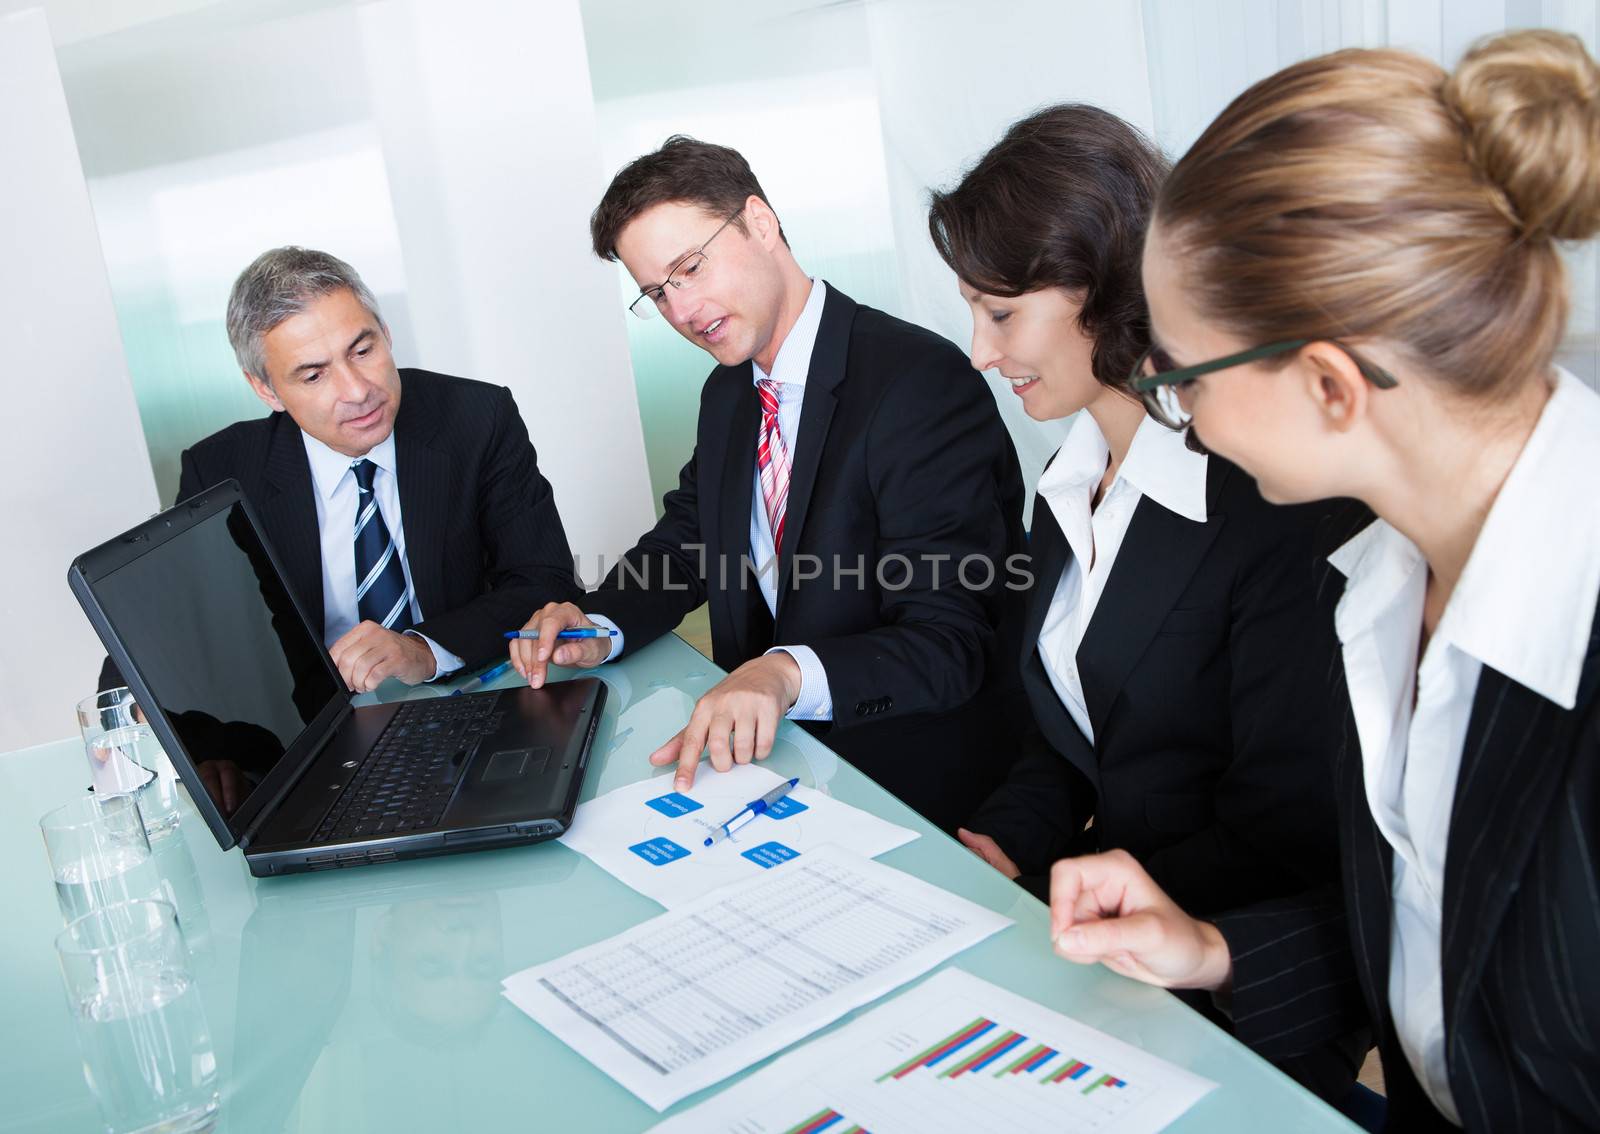 Group of diverse business executives holding a meeting around a table discussing graphs showing statistical analysis